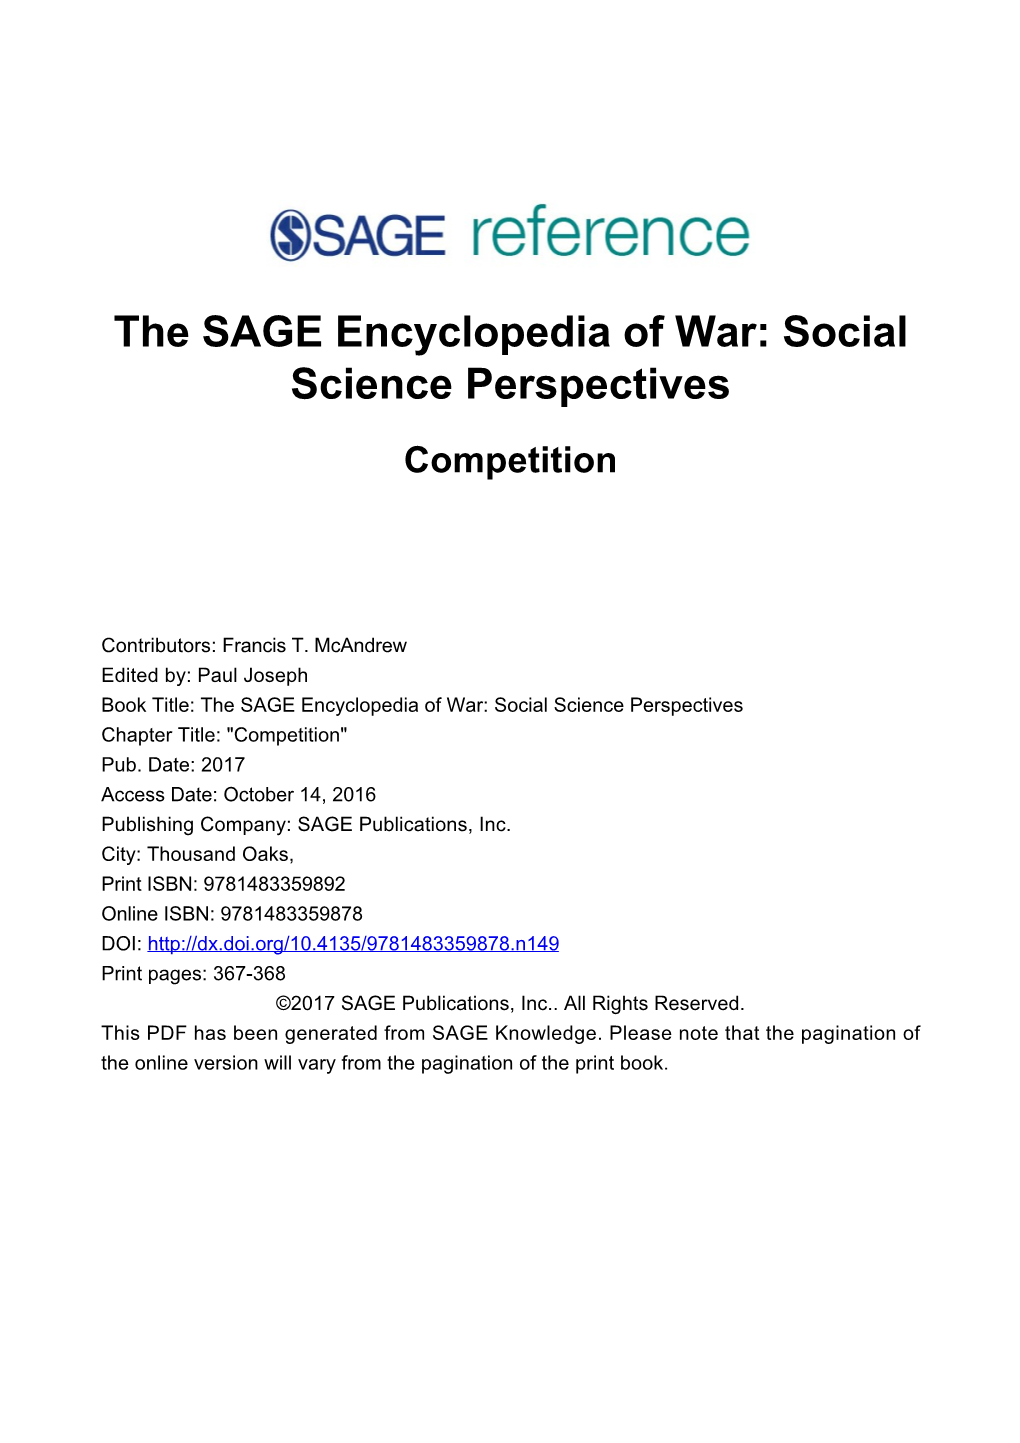 The SAGE Encyclopedia of War: Social Science Perspectives Competition